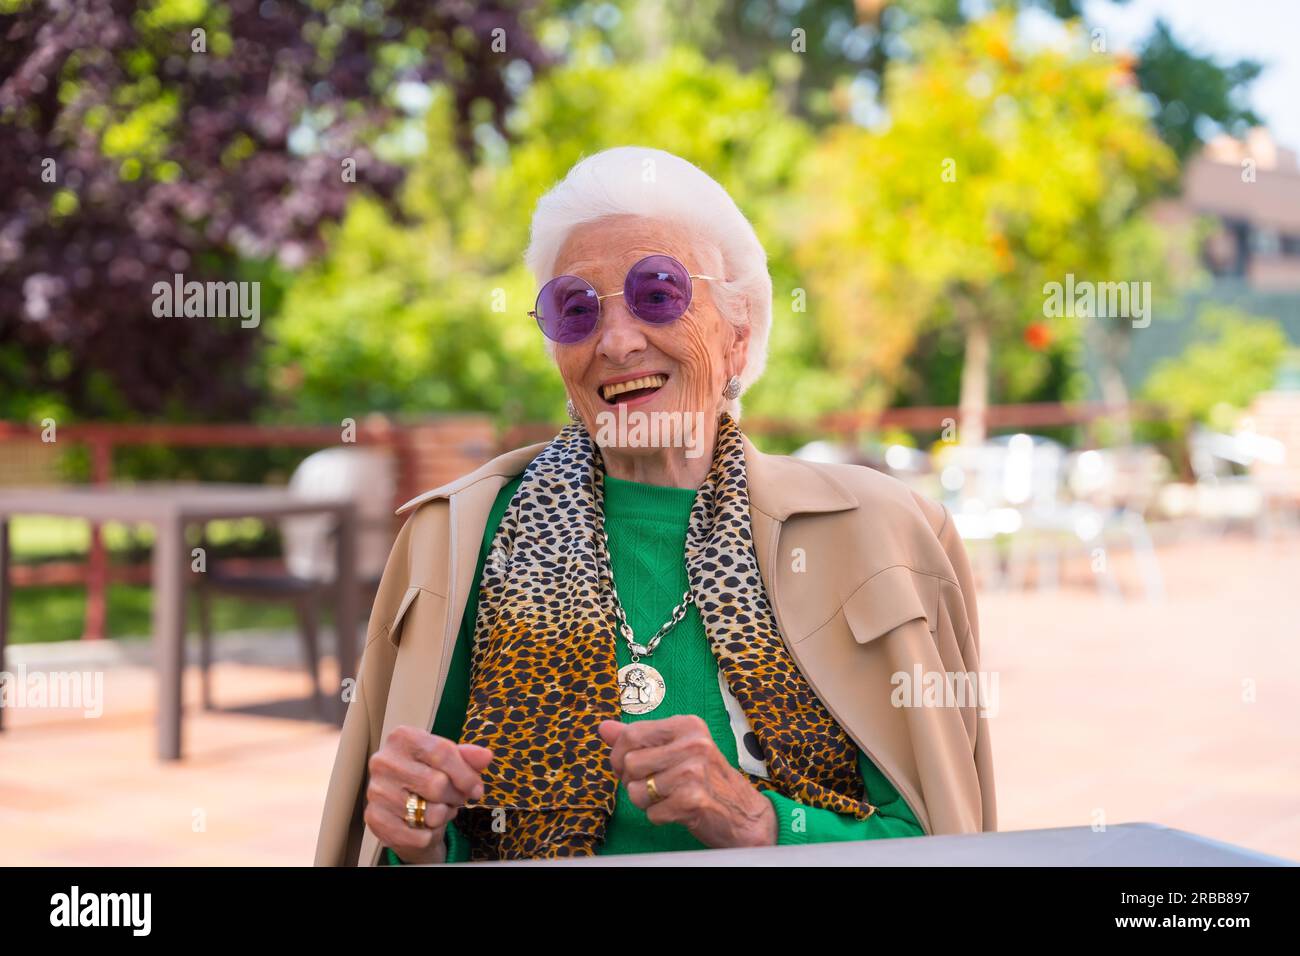 An elderly woman dancing in the garden of a nursing home or retirement home at a summer party wearing sunglasses Stock Photo